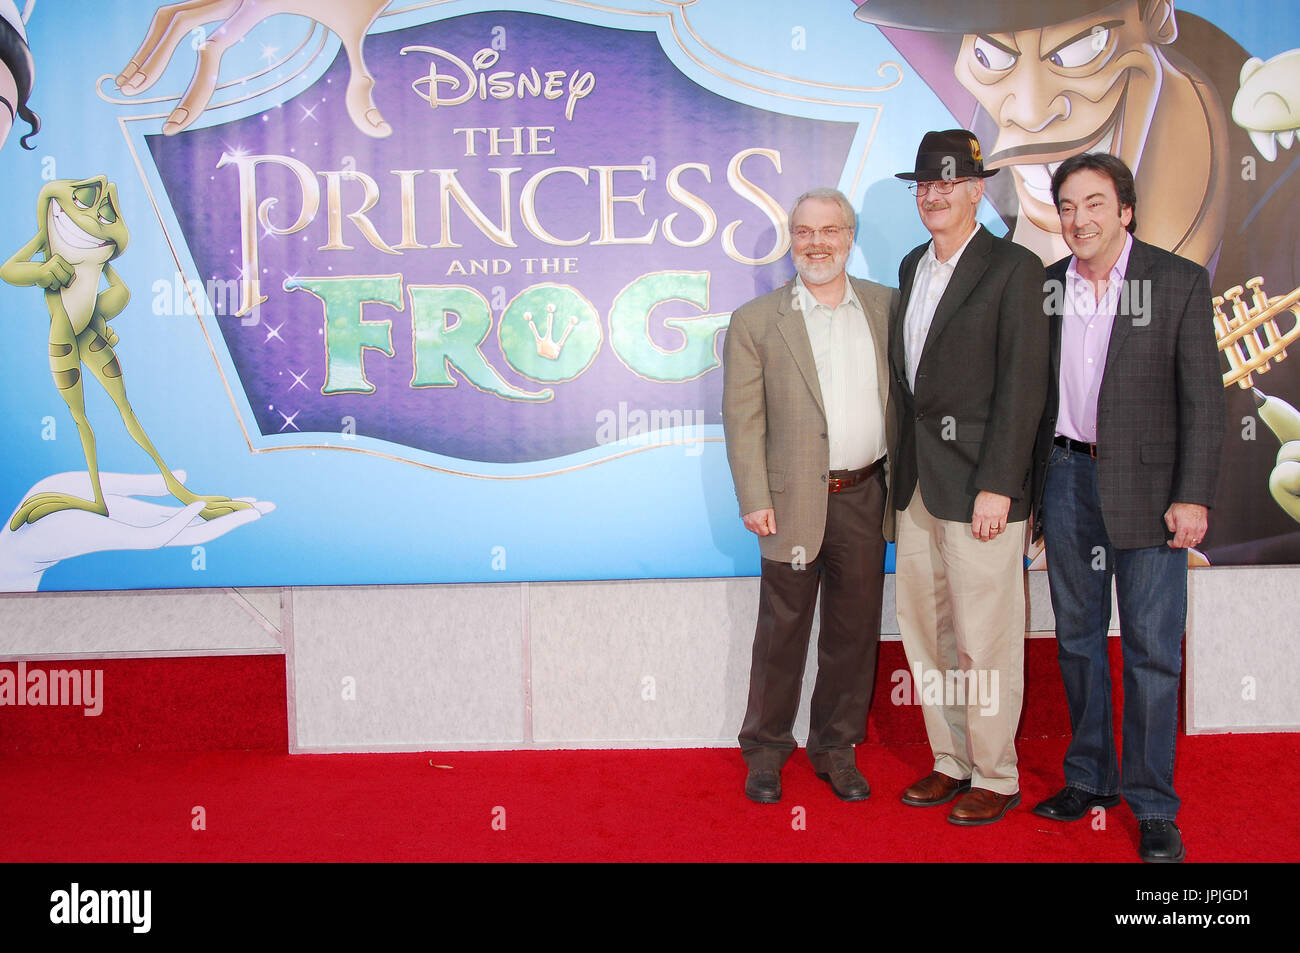 Directors Ron Clements, John Musker and Peter Del Vecho at the World Premiere of 'The Princess And The Frog' held at the Walt Disney Studios in Burbank, CA. The event took place on Sunday, November 15, 2009. Photo by: PRPP Pacific Rim Photo Press. Stock Photo